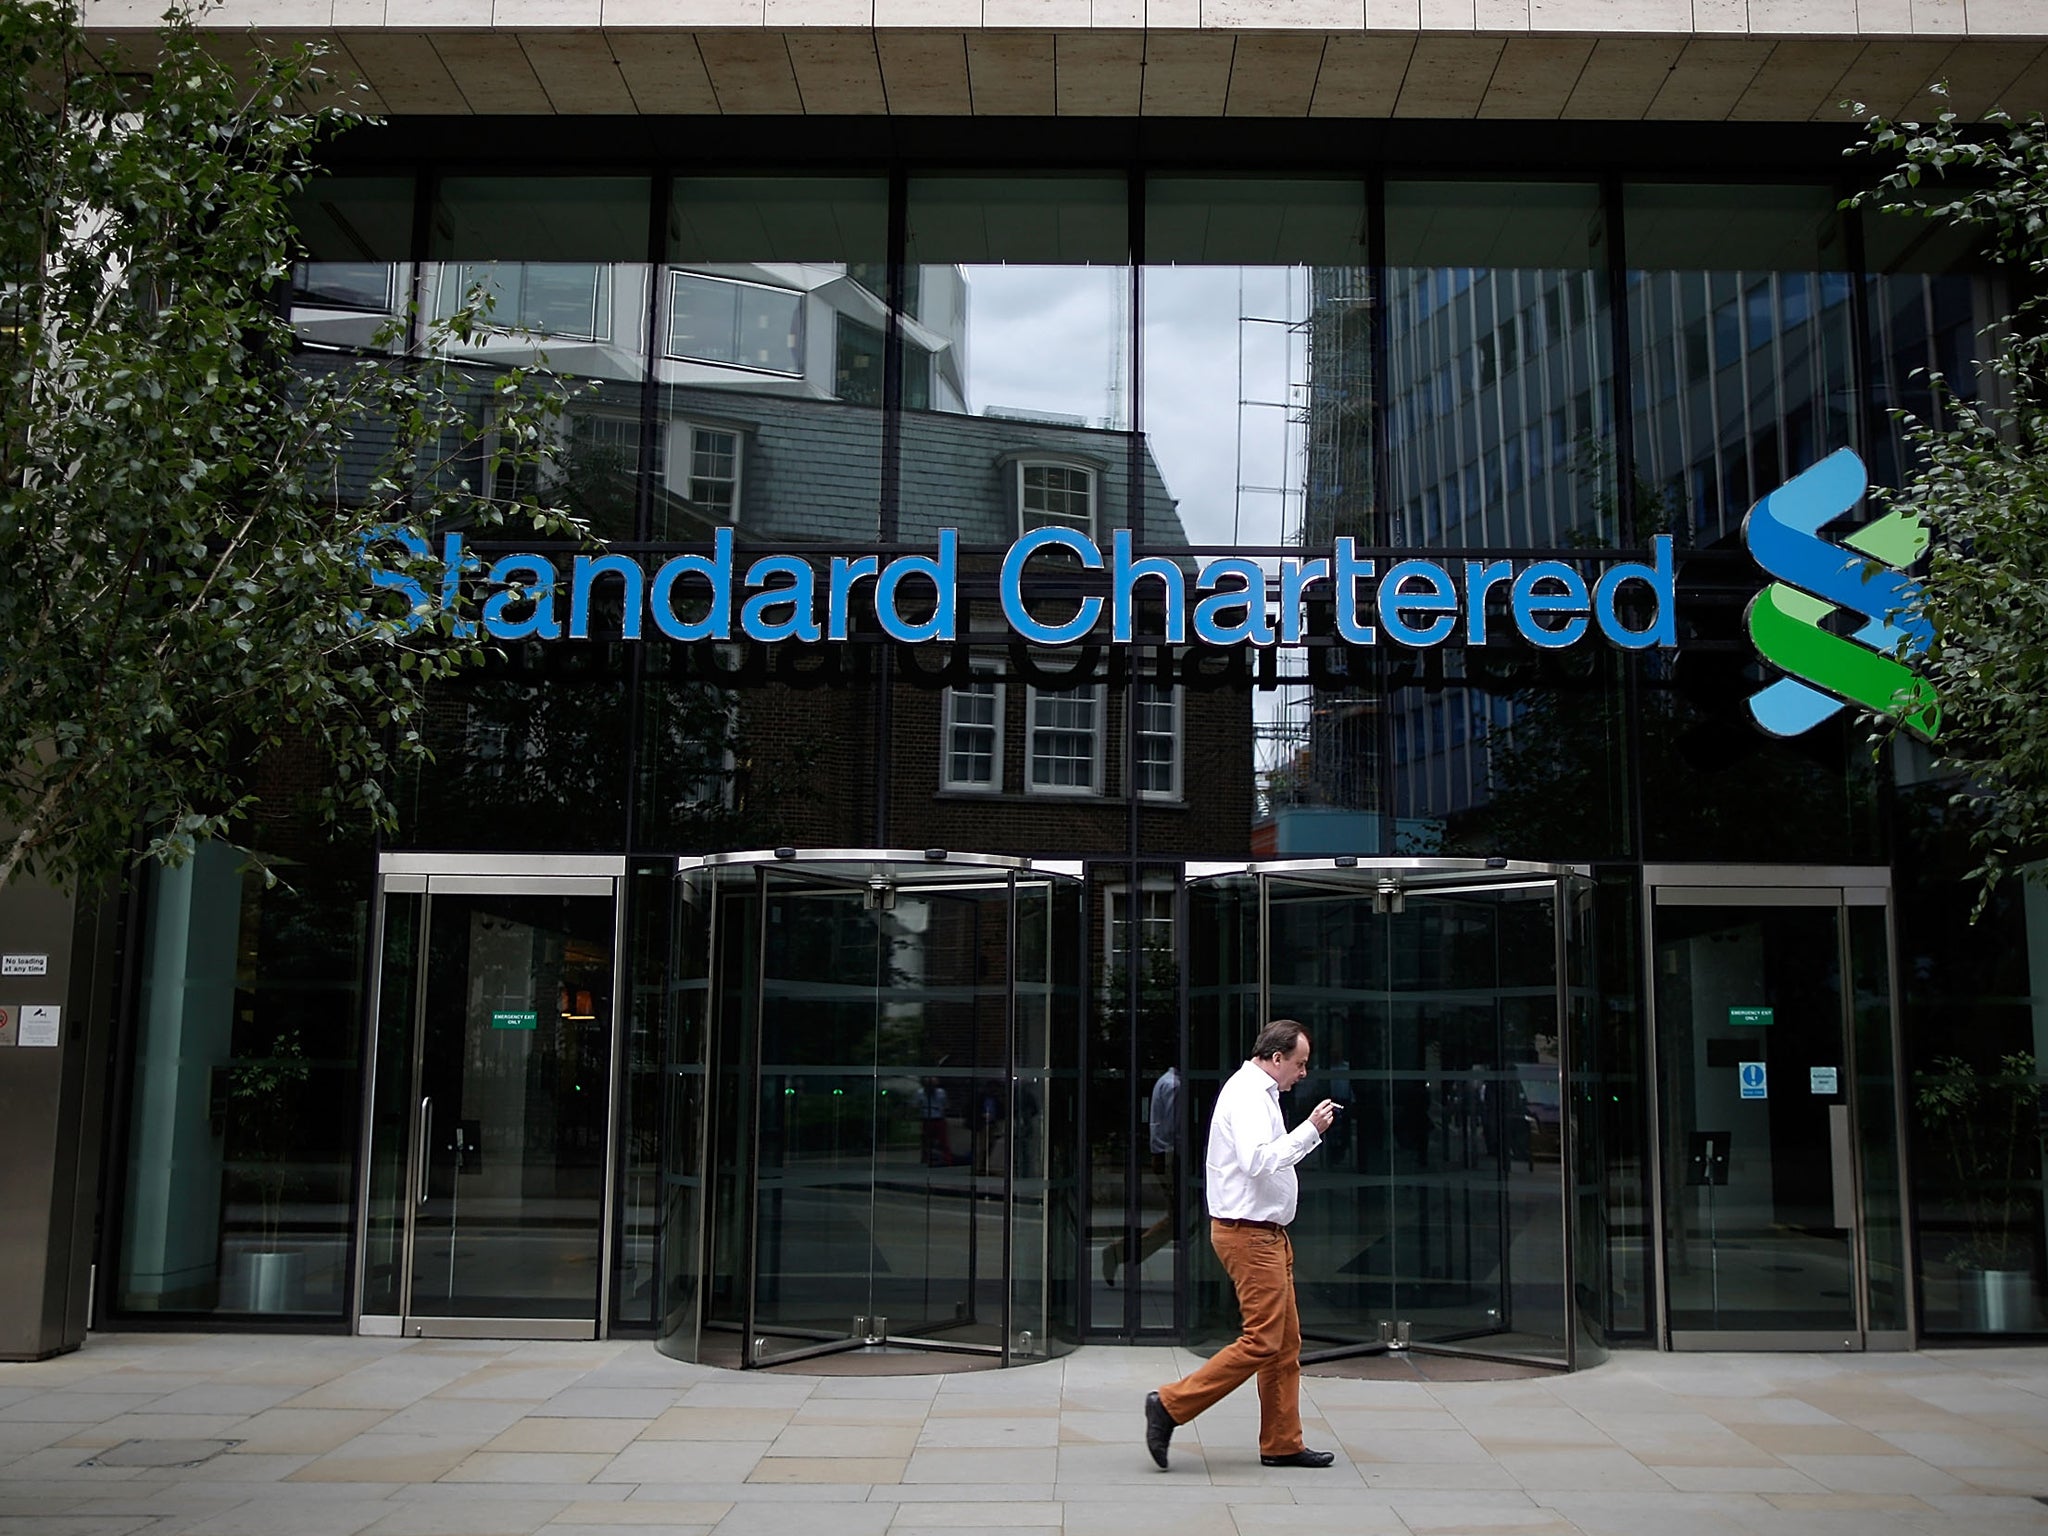 News of the rift between Standard’s directors comes after the bank warned on Wednesday of its first fall in operating profits for a decade